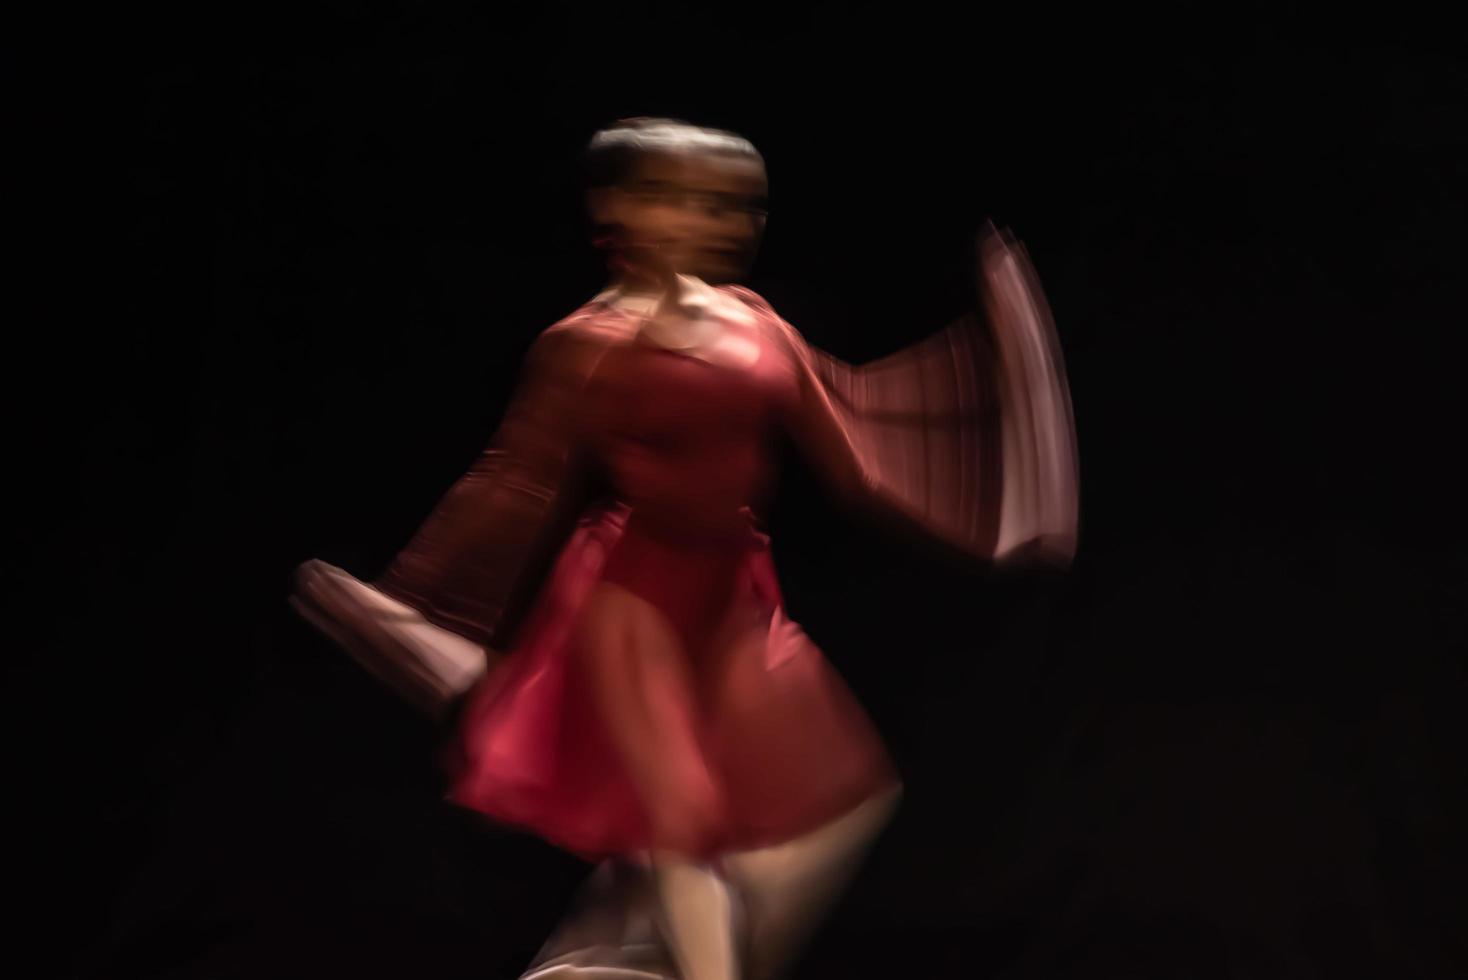 The abstract movement of the dance photo